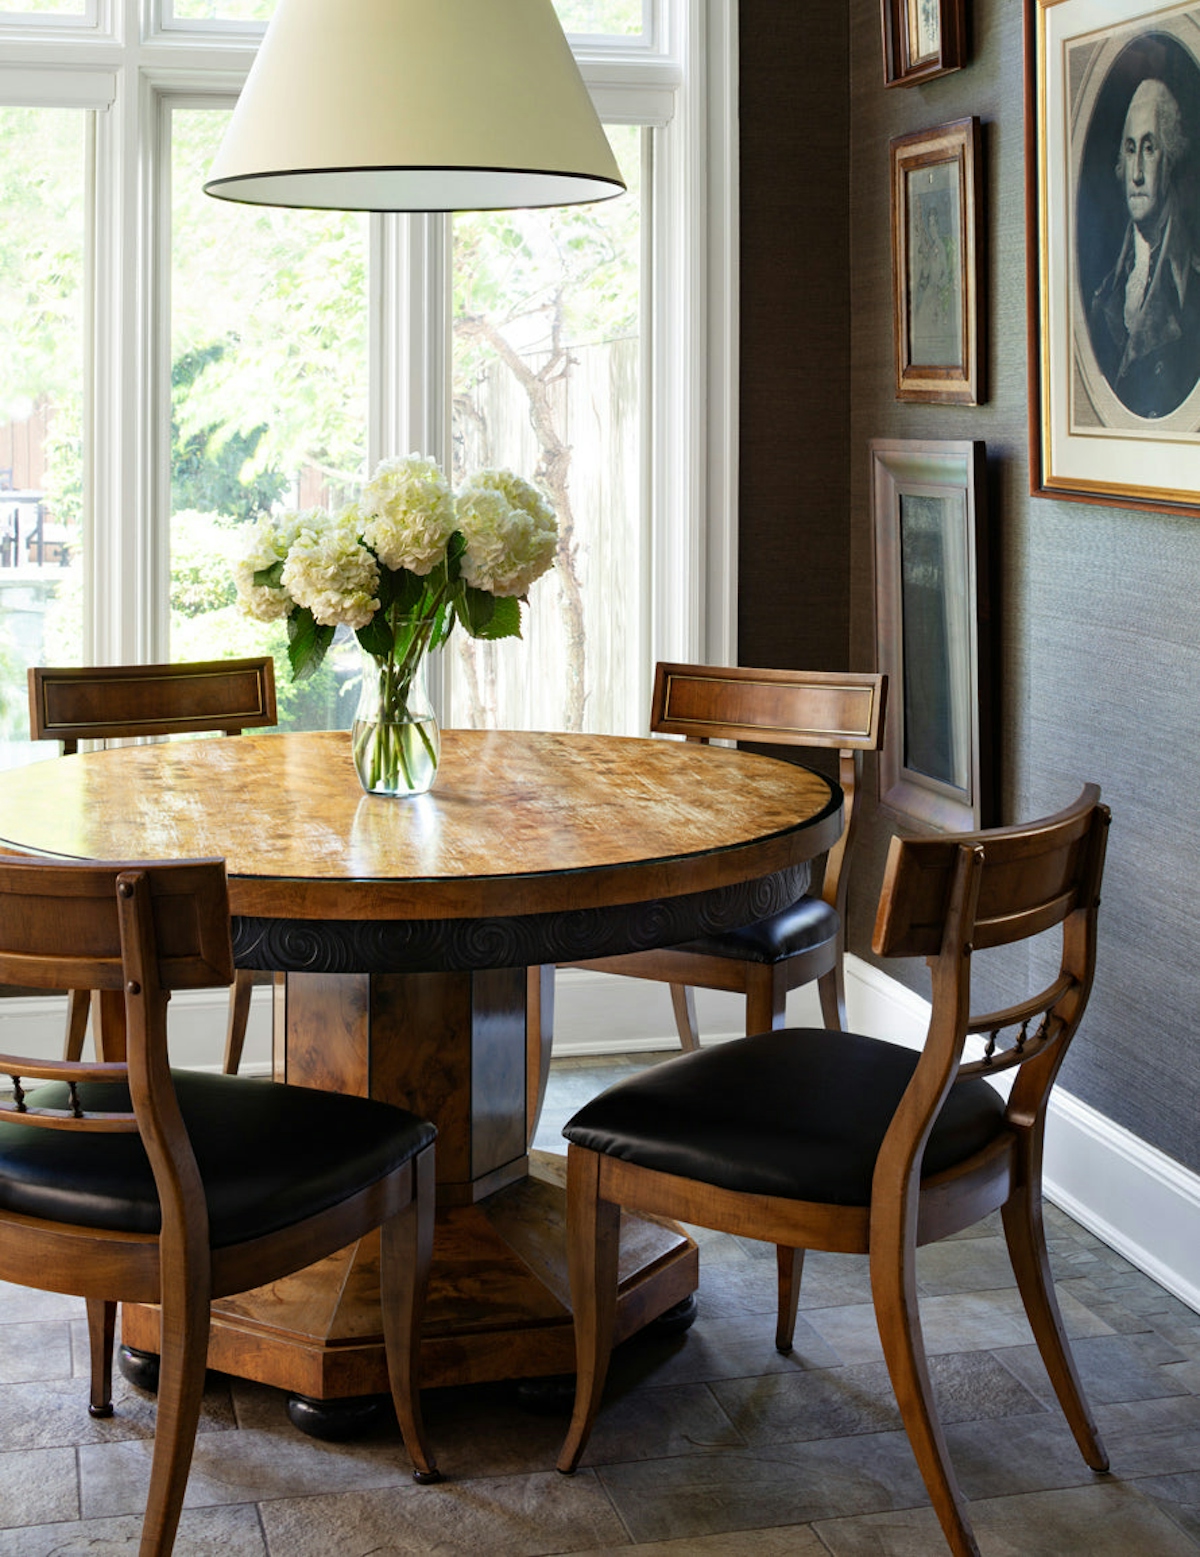 Luxury Dining Room Styles | Traditional Dining Room | Carlyle Designs | Read more in The Luxurist at LuxDeco.com